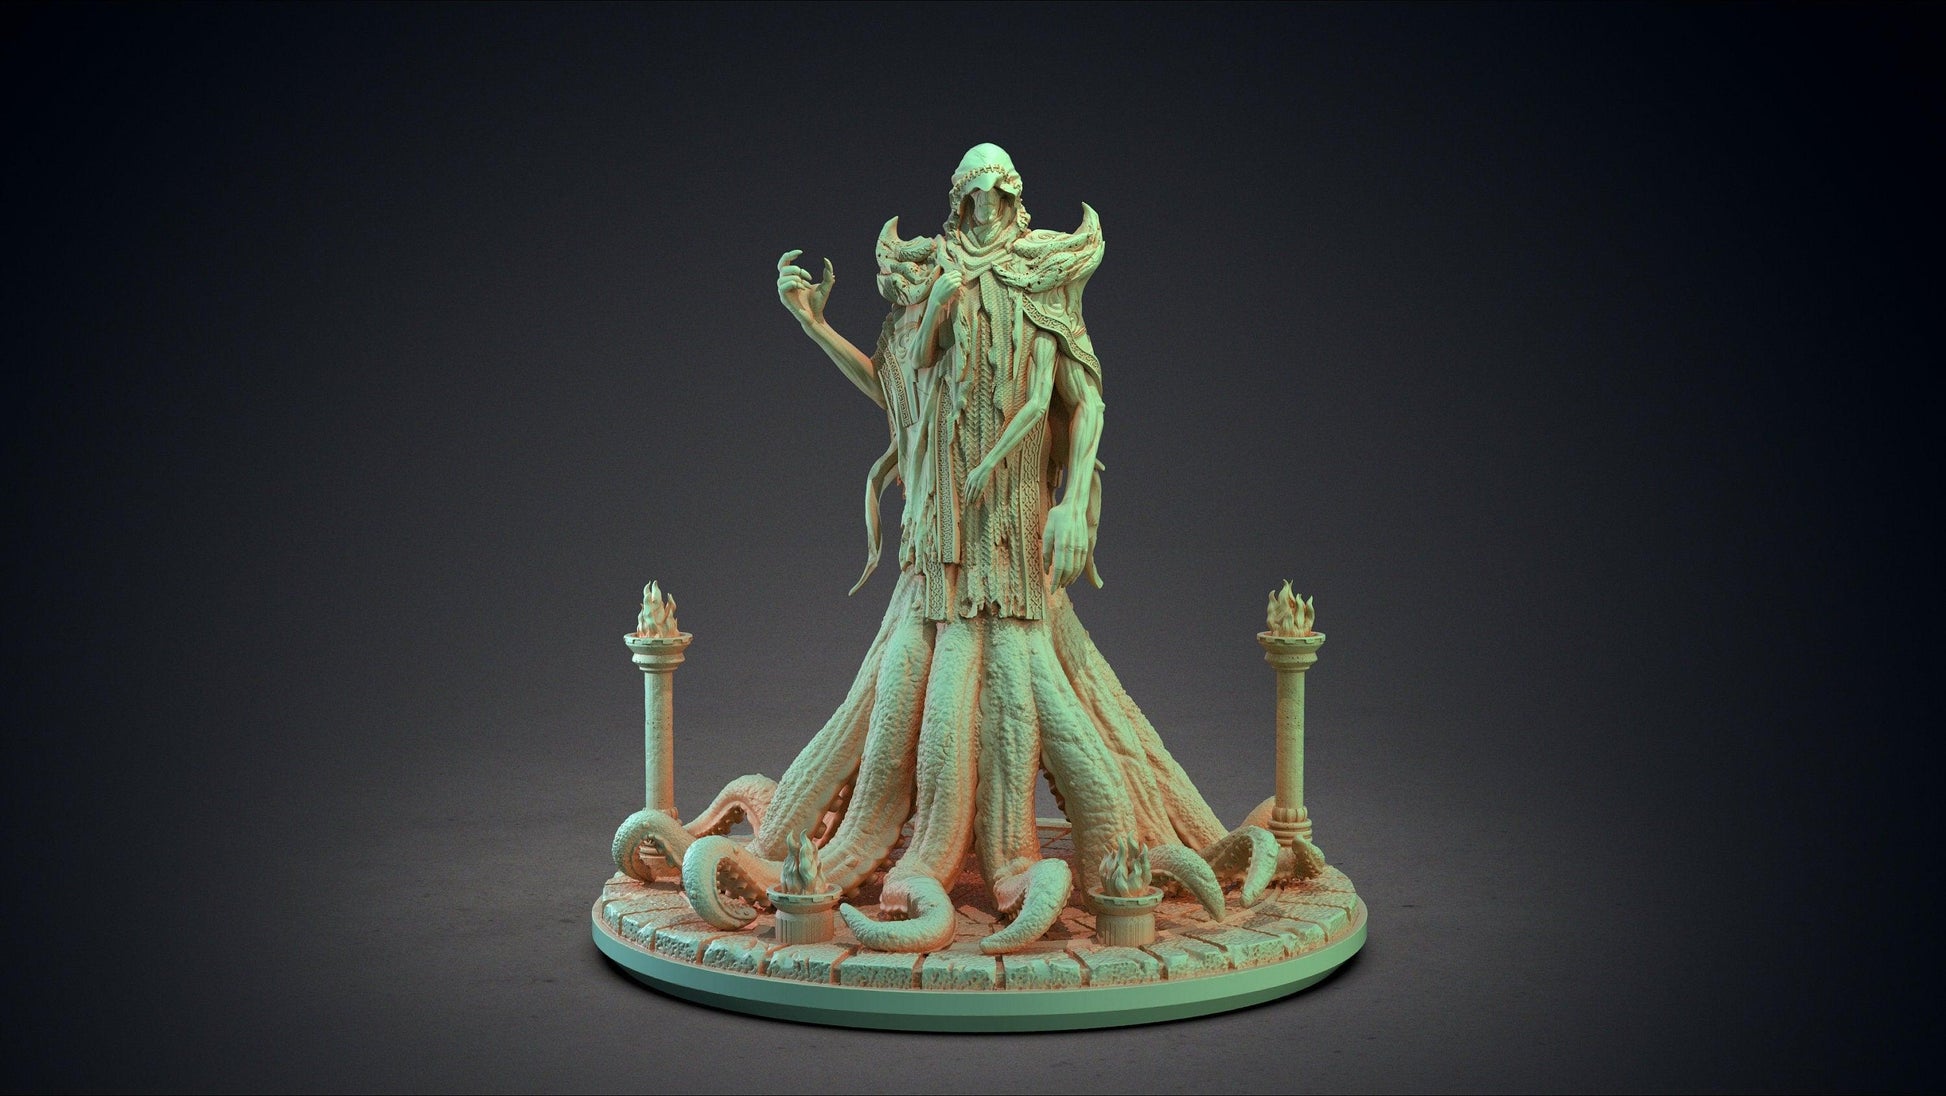 Hastur Miniature | Clay Cyanide | Great Old Ones | Tabletop Gaming | DnD Miniature | Dungeons and Dragons DnD monster manual Cthulhu Statue - Plague Miniatures shop for DnD Miniatures